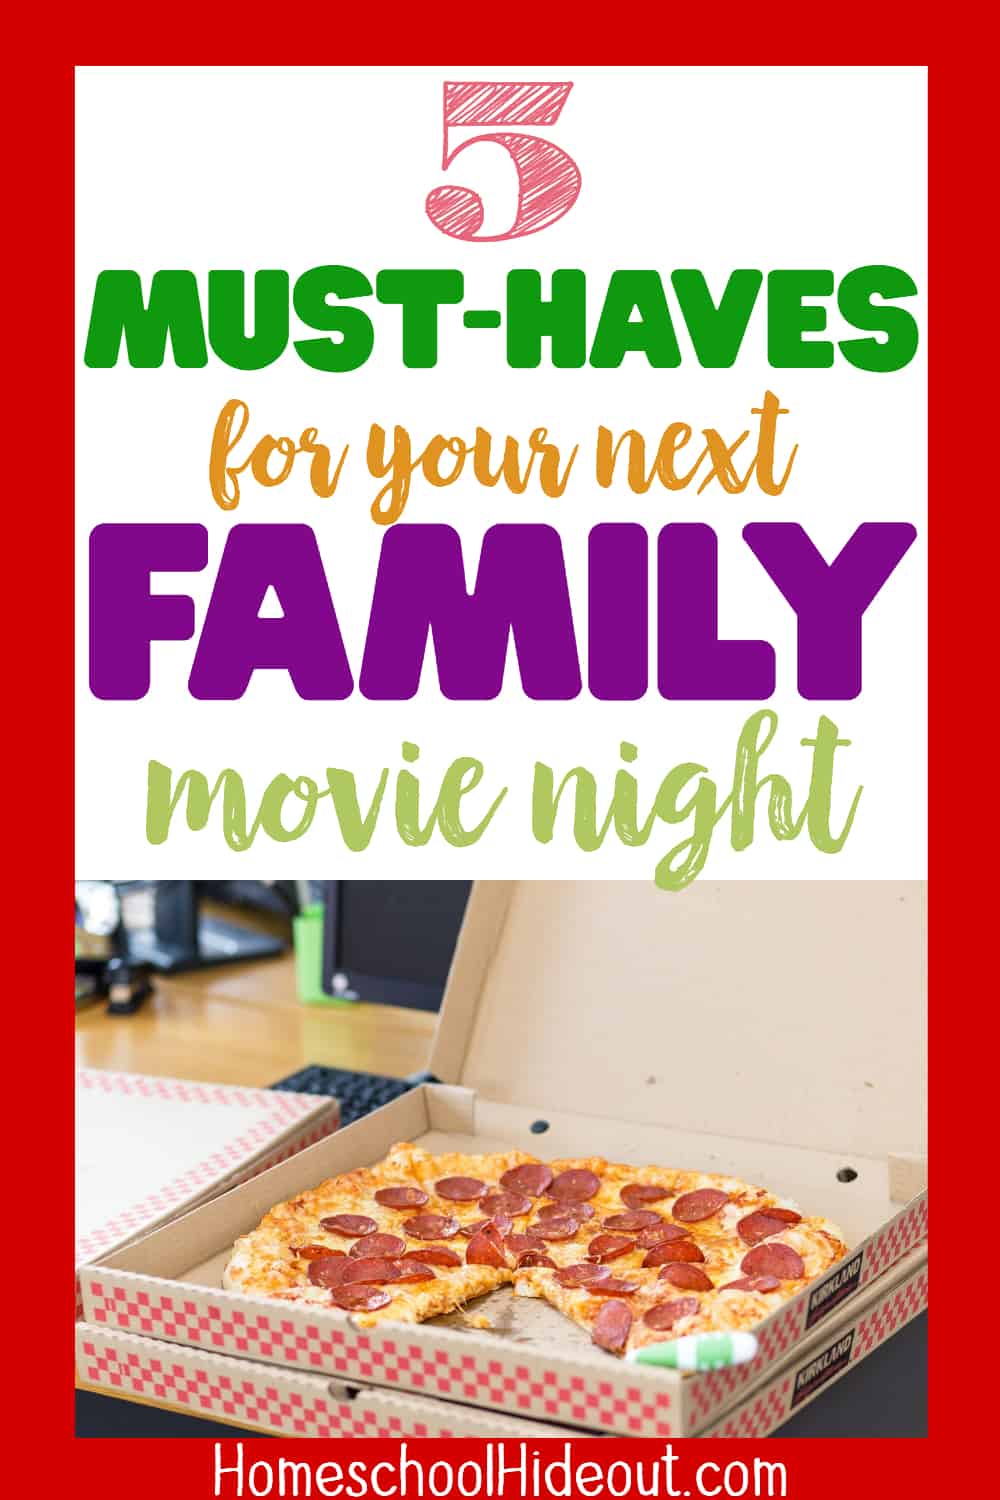 You don't need to compromise your family's values to enjoy a homeschool family movie night! We've got ideas to keep it clean and kid-friendly. #homeschoolers #indiemovies #mounthideawaymysteries